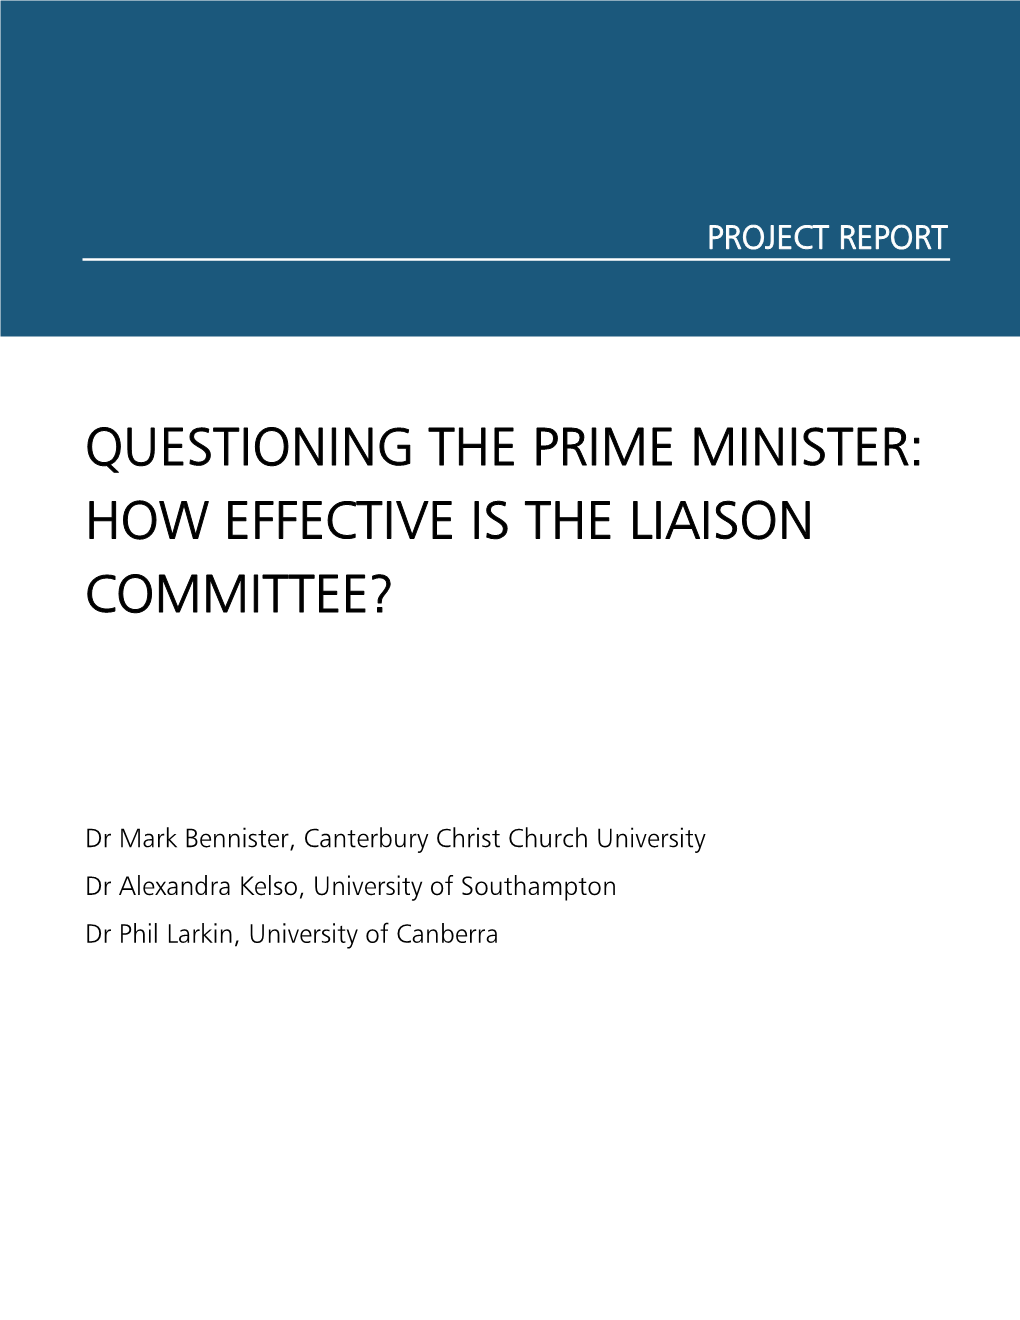 Questioning the Prime Minister: How Effective Is the Liaison Committee?